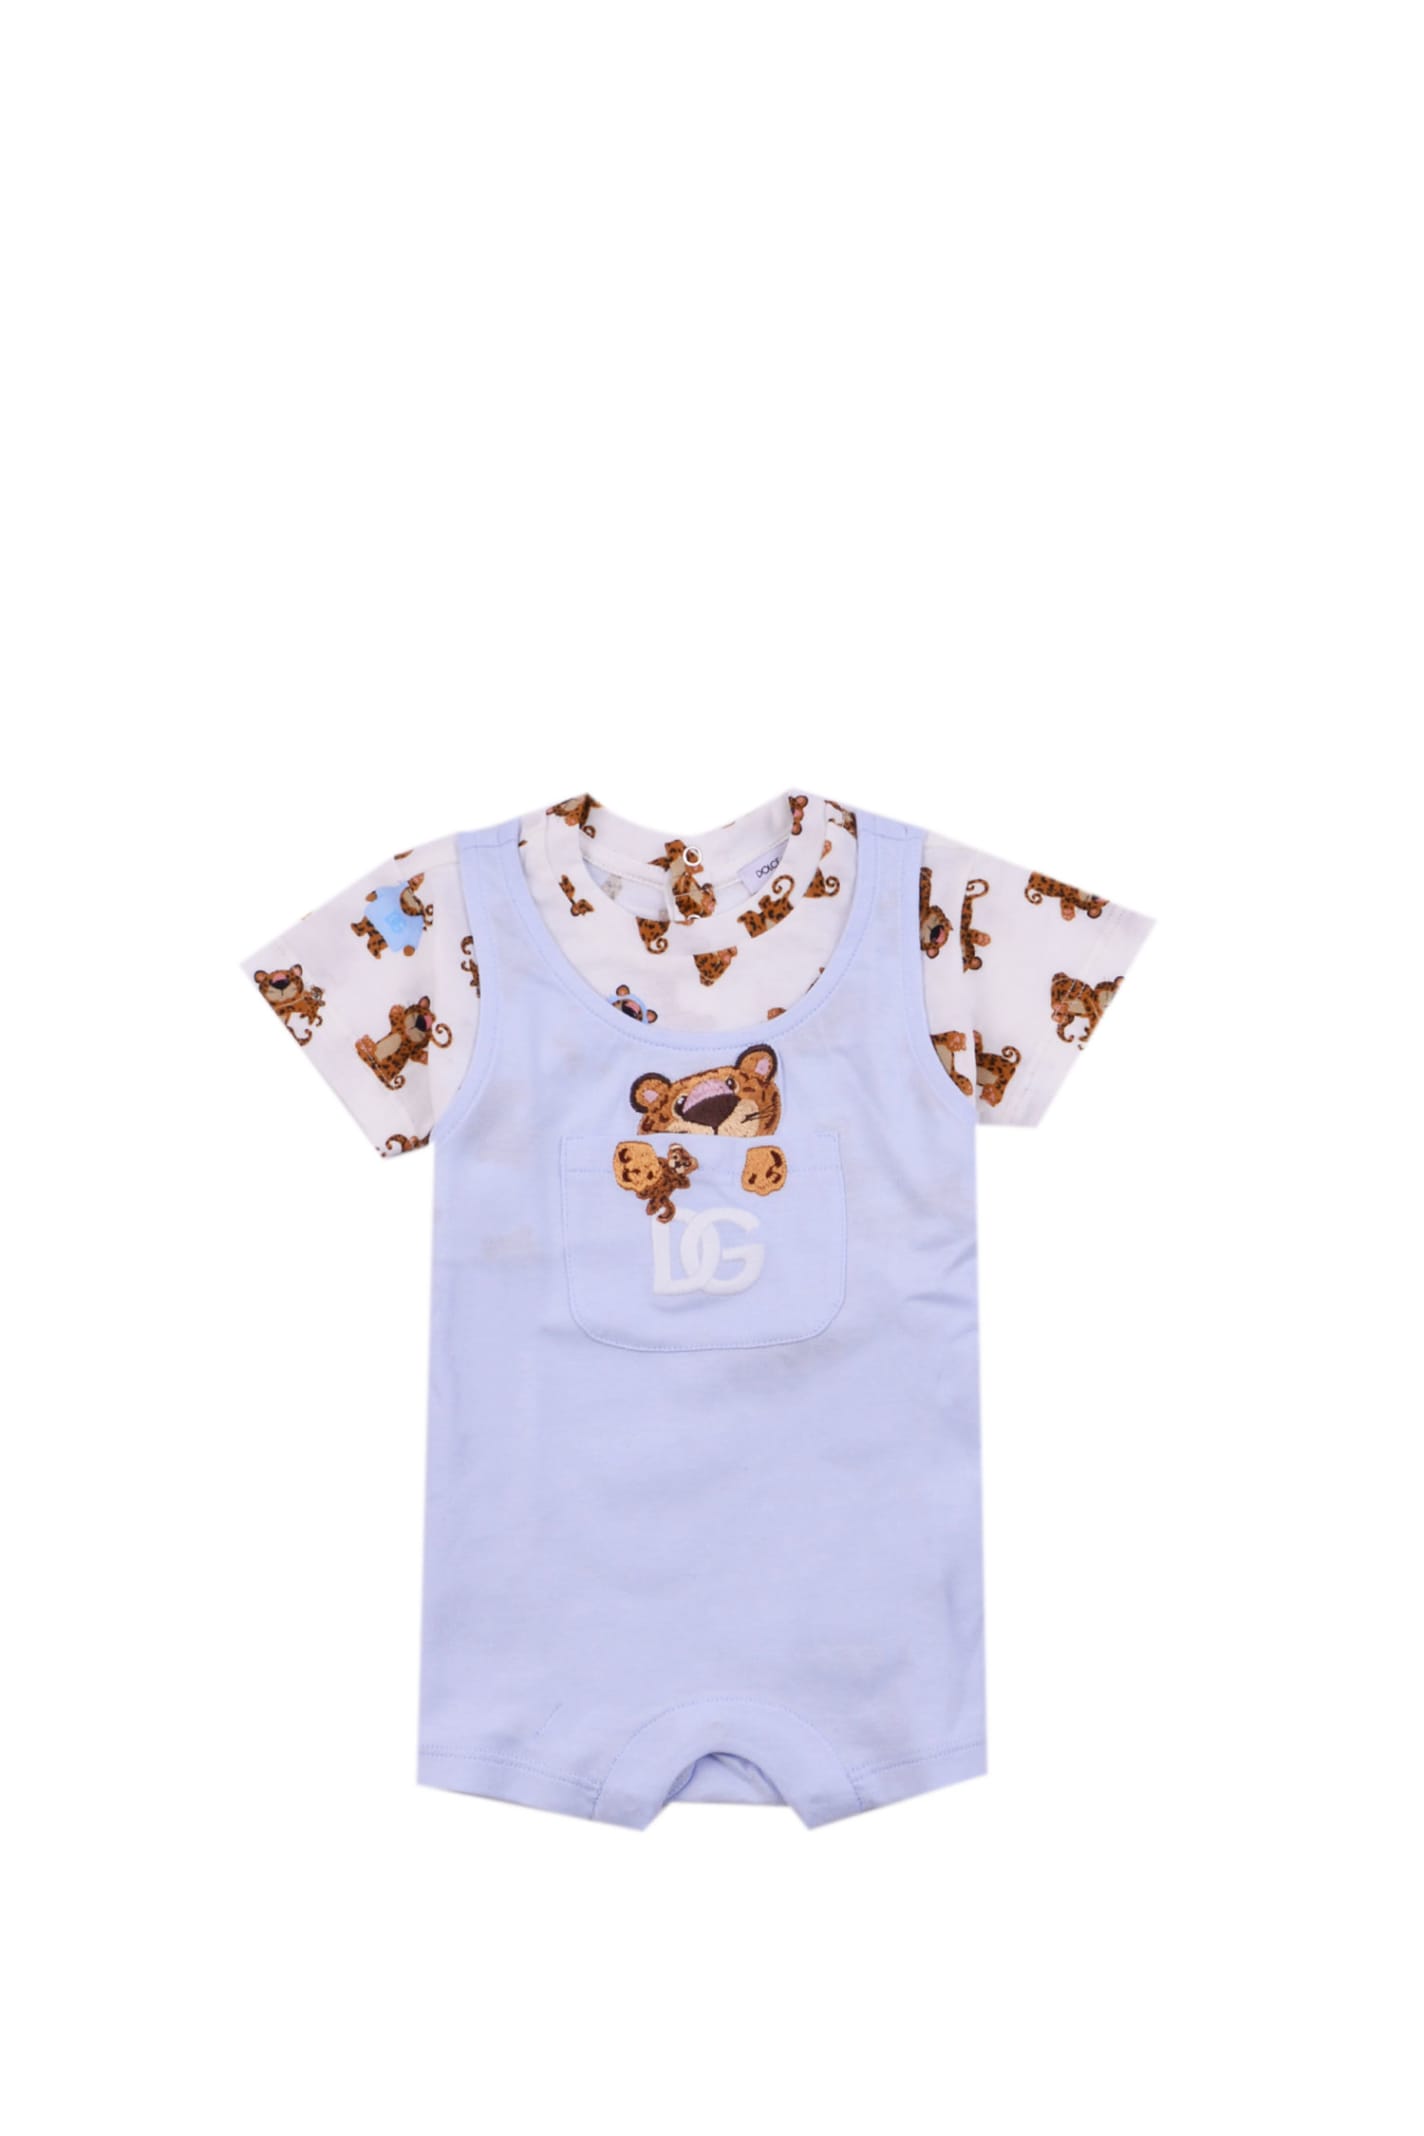 Dolce & Gabbana Babies' Printed T-shirt And Overalls Set In White